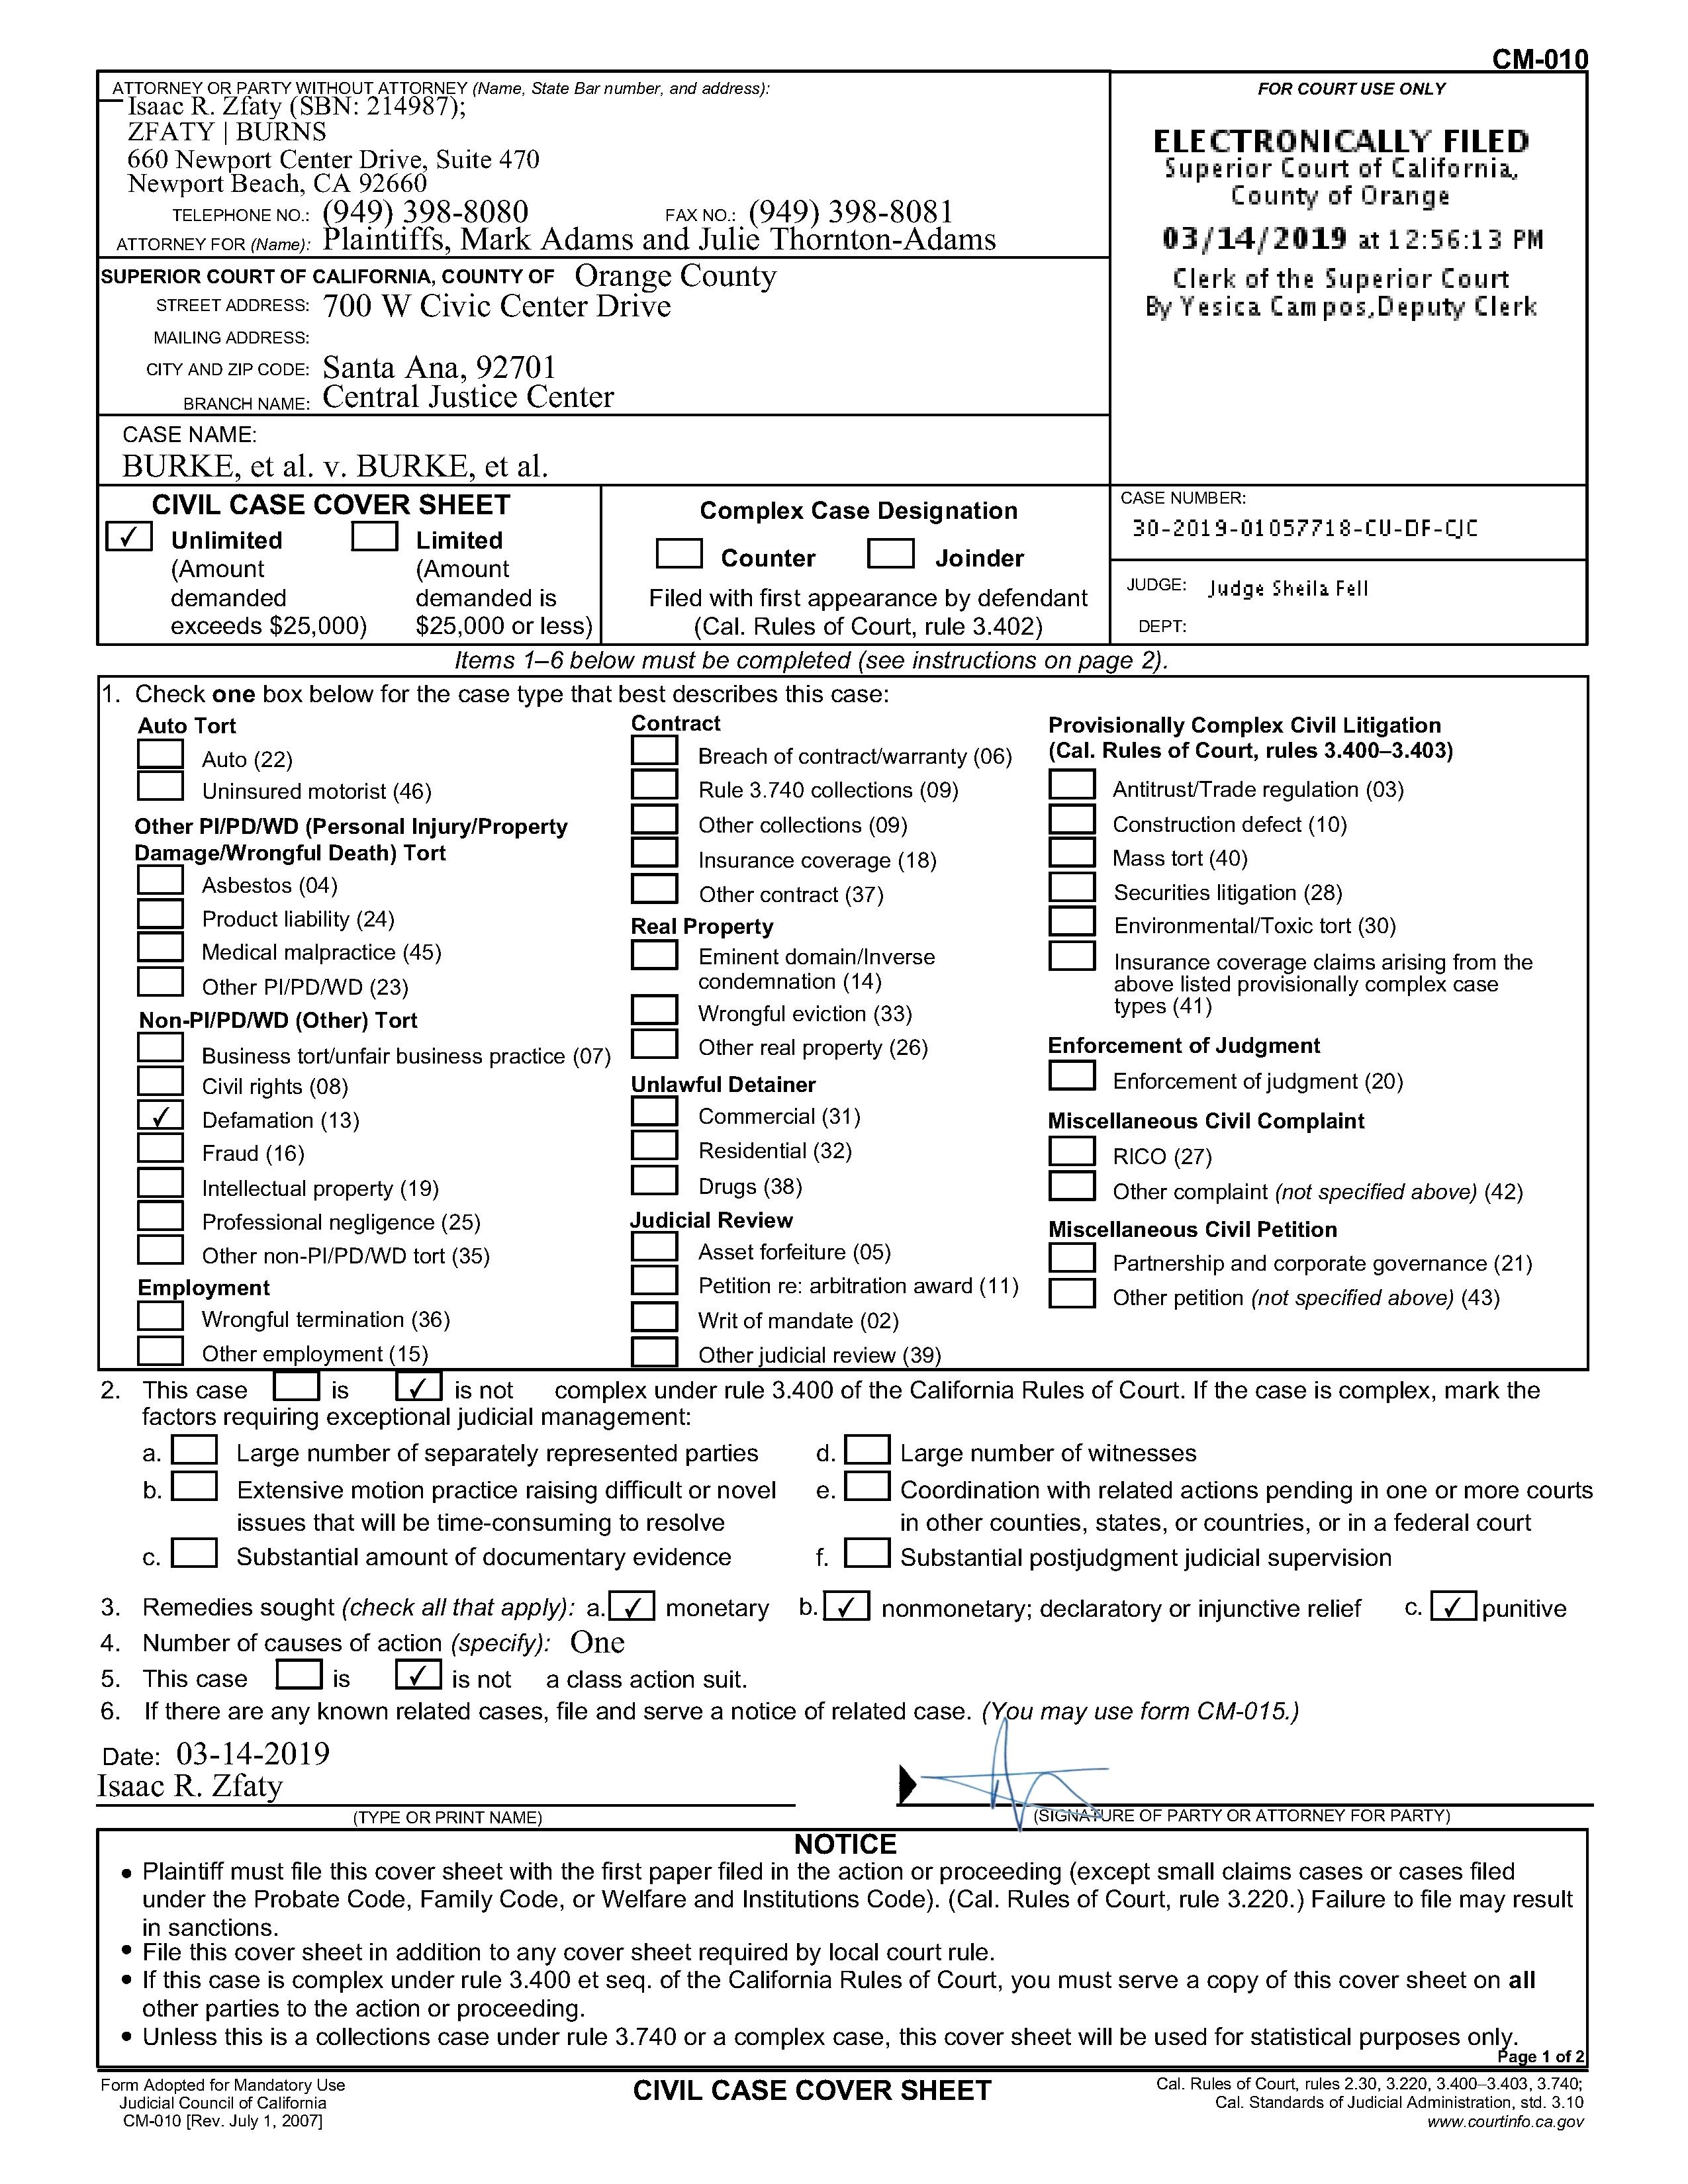 Civil Cover Sheet, page 1